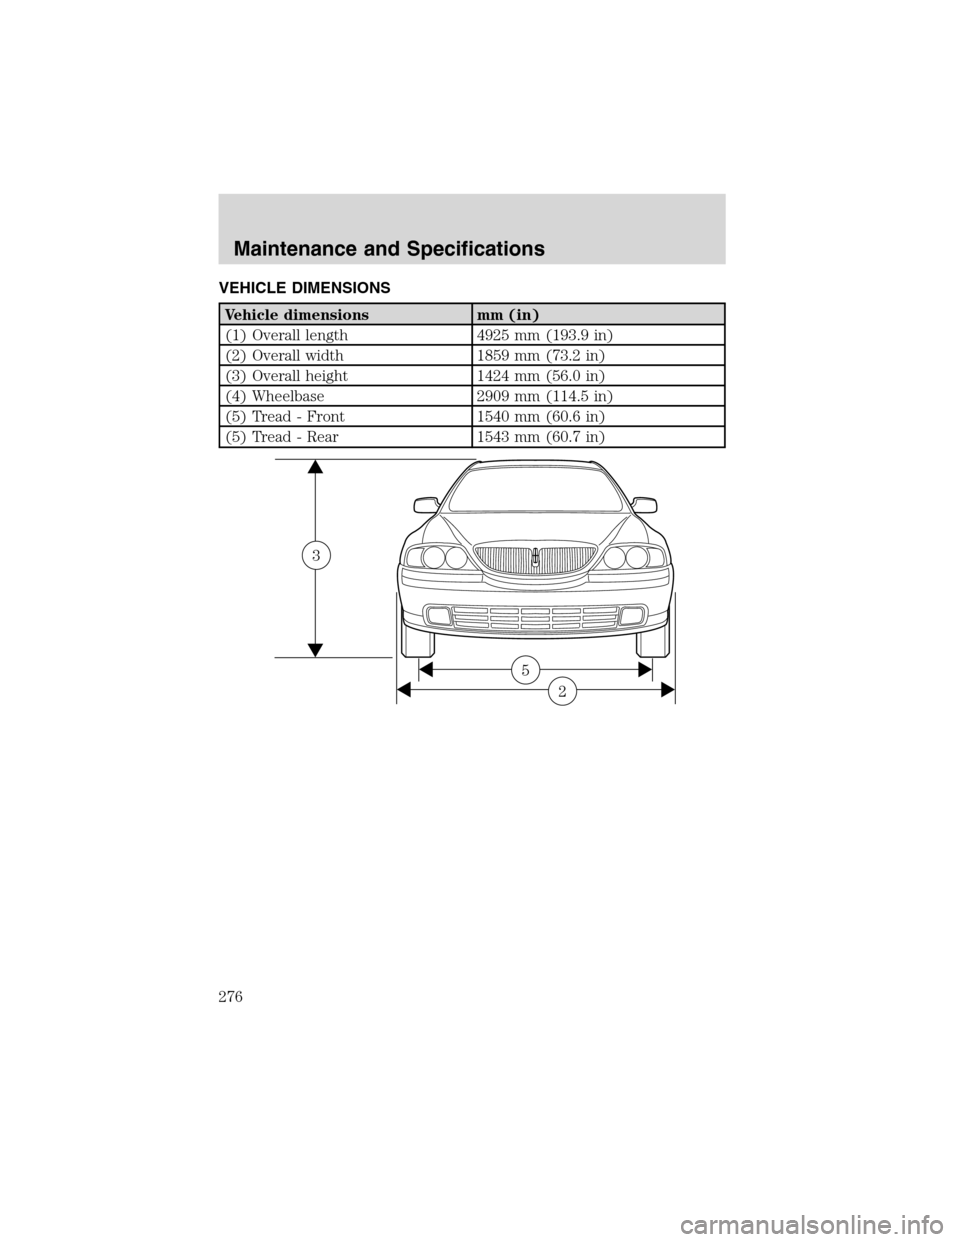 LINCOLN LS 2003  Owners Manual VEHICLE DIMENSIONS
Vehicle dimensions mm (in)
(1) Overall length 4925 mm (193.9 in)
(2) Overall width 1859 mm (73.2 in)
(3) Overall height 1424 mm (56.0 in)
(4) Wheelbase 2909 mm (114.5 in)
(5) Tread 